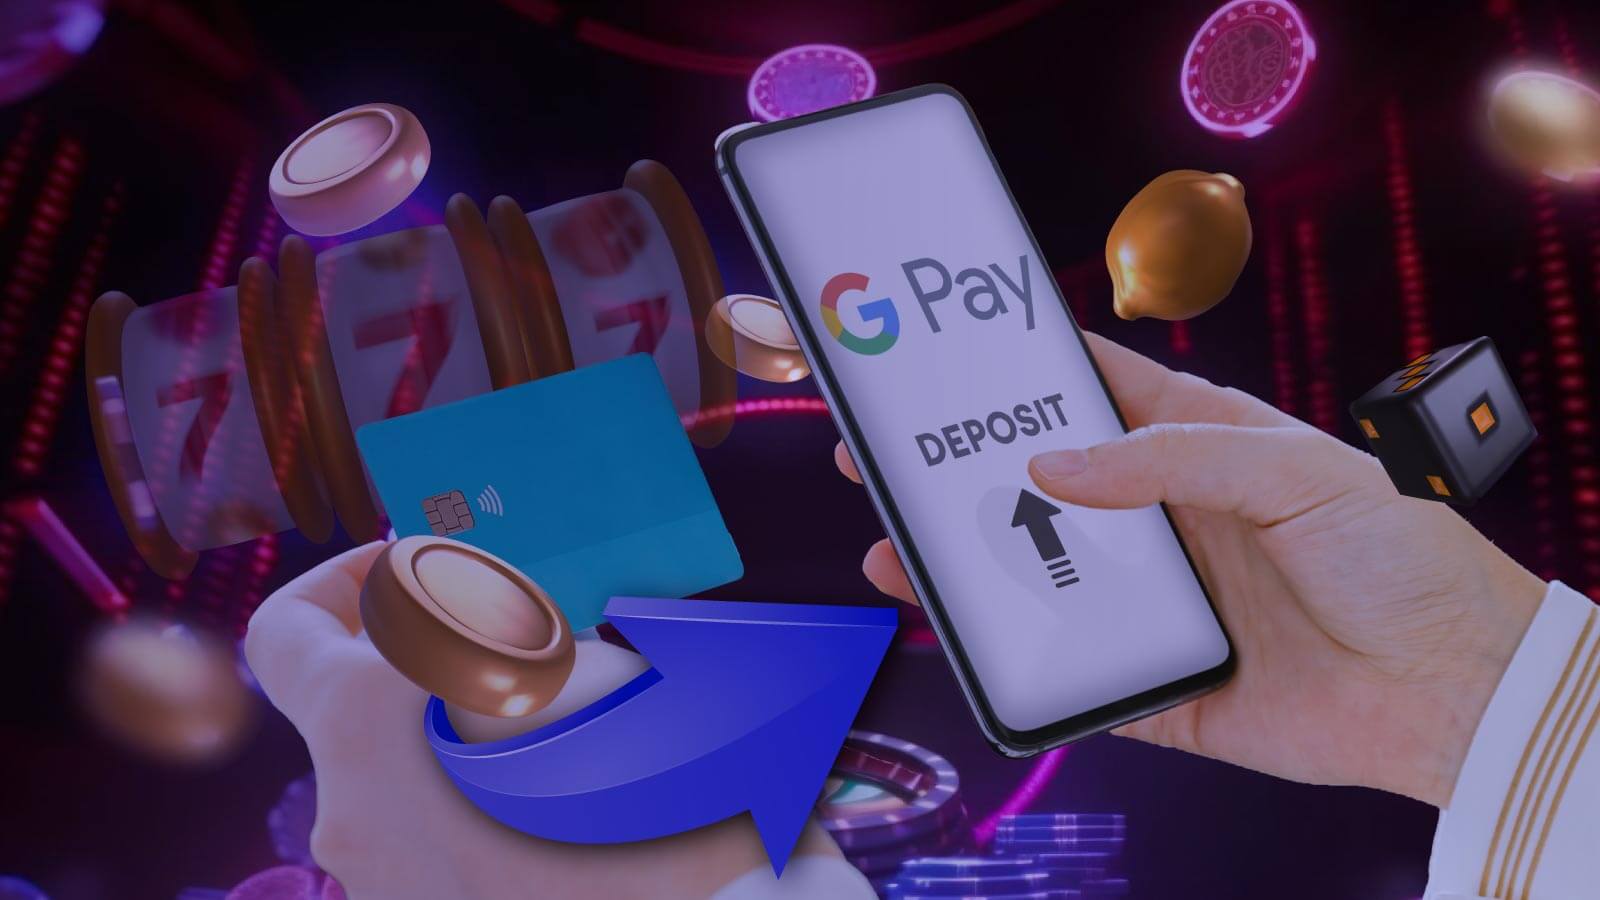 Making-Deposits-With-Google-Pay